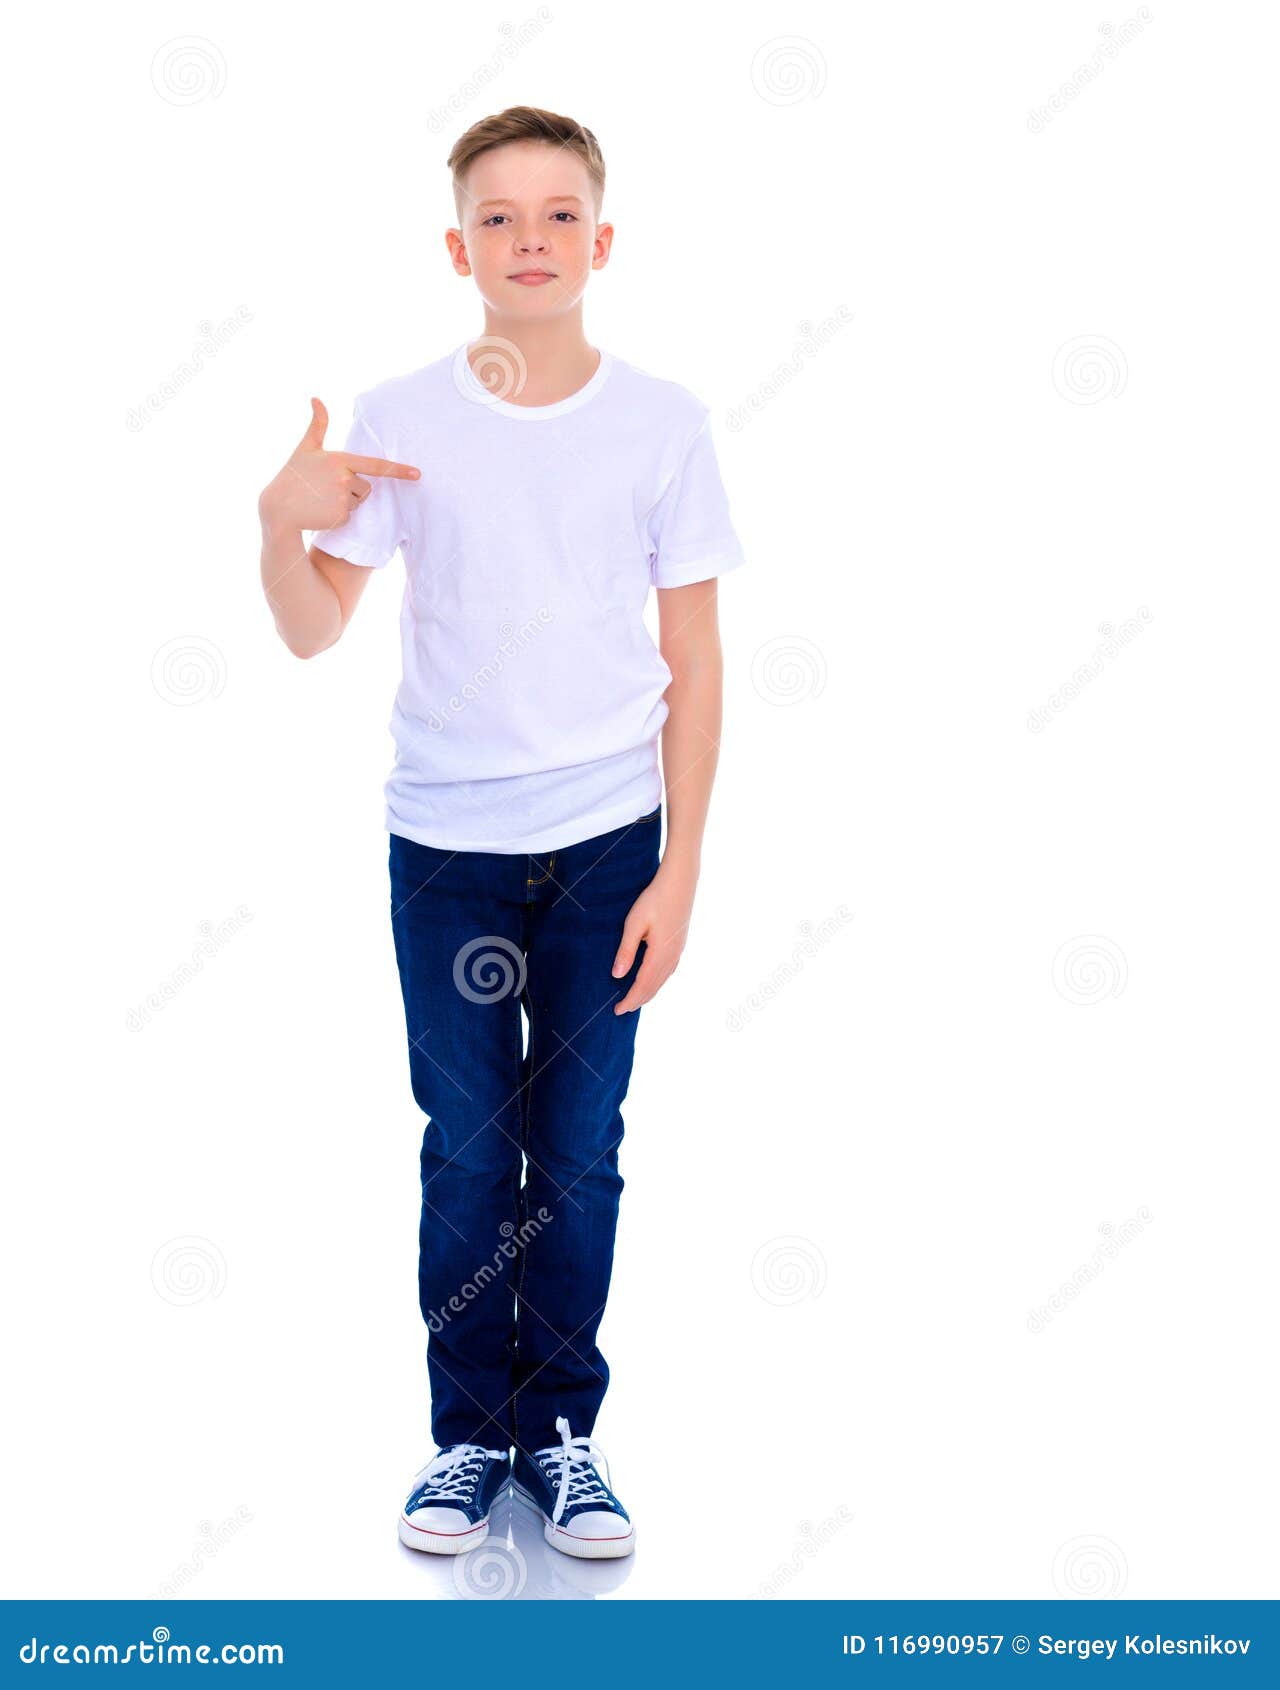 A School Boy Points To His White T-shirt. Stock Image - Image of cotton ...